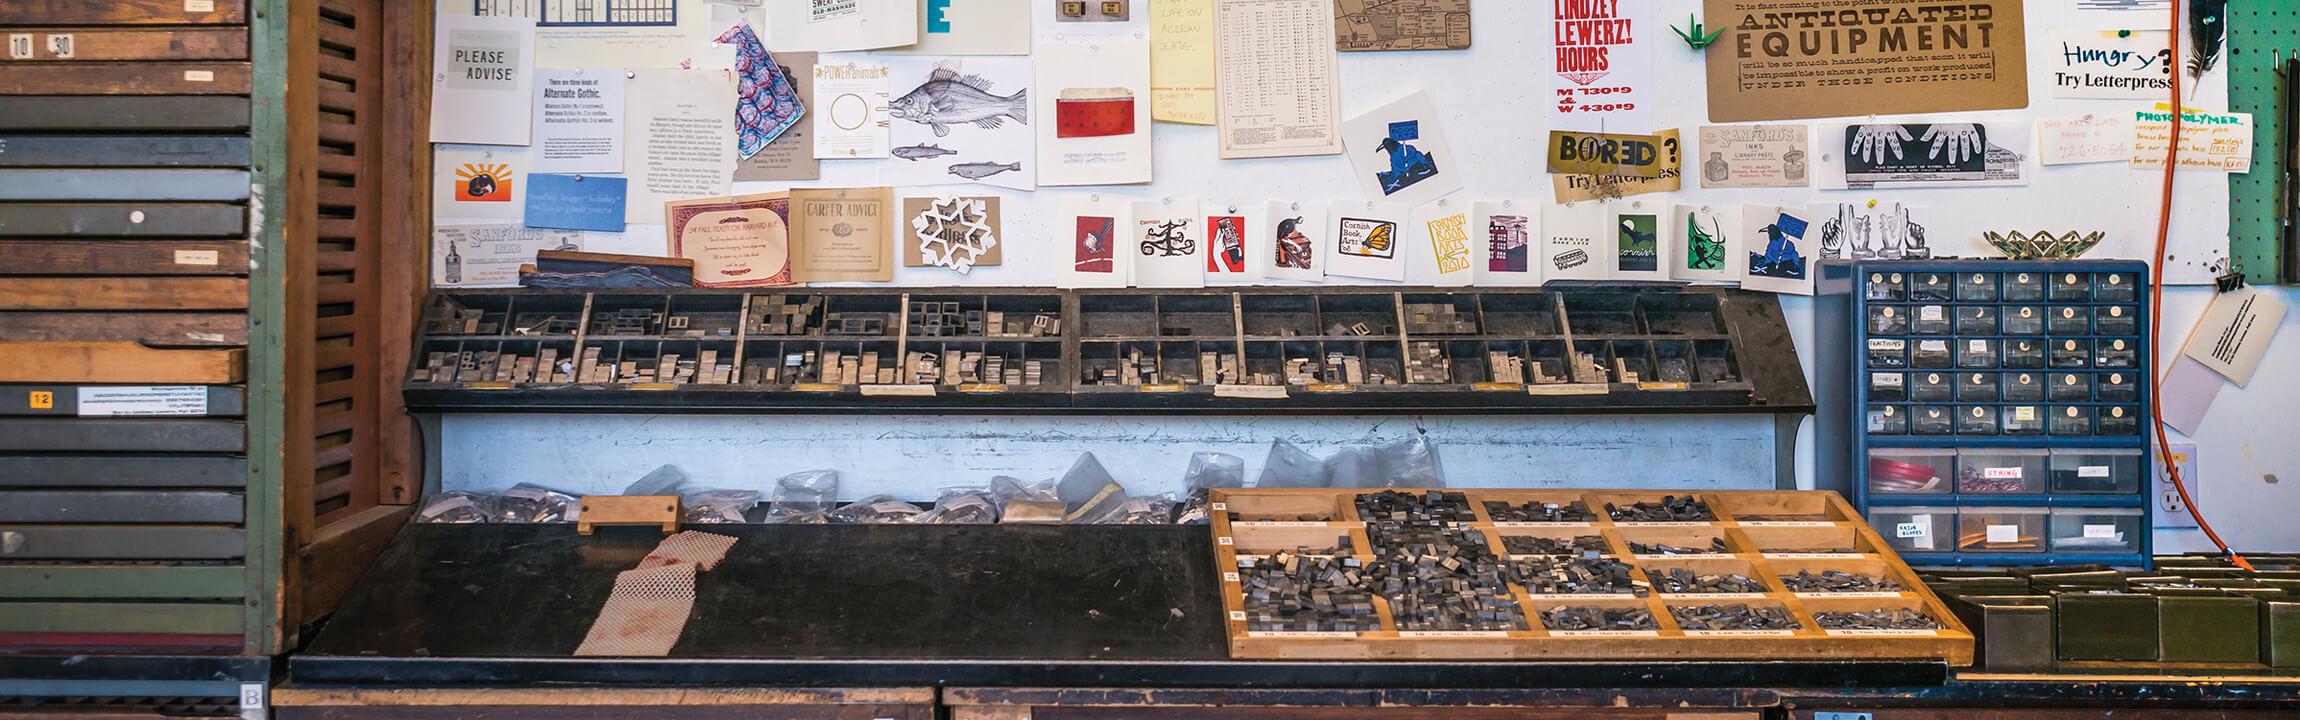 printmaking studio with block letters for printing press